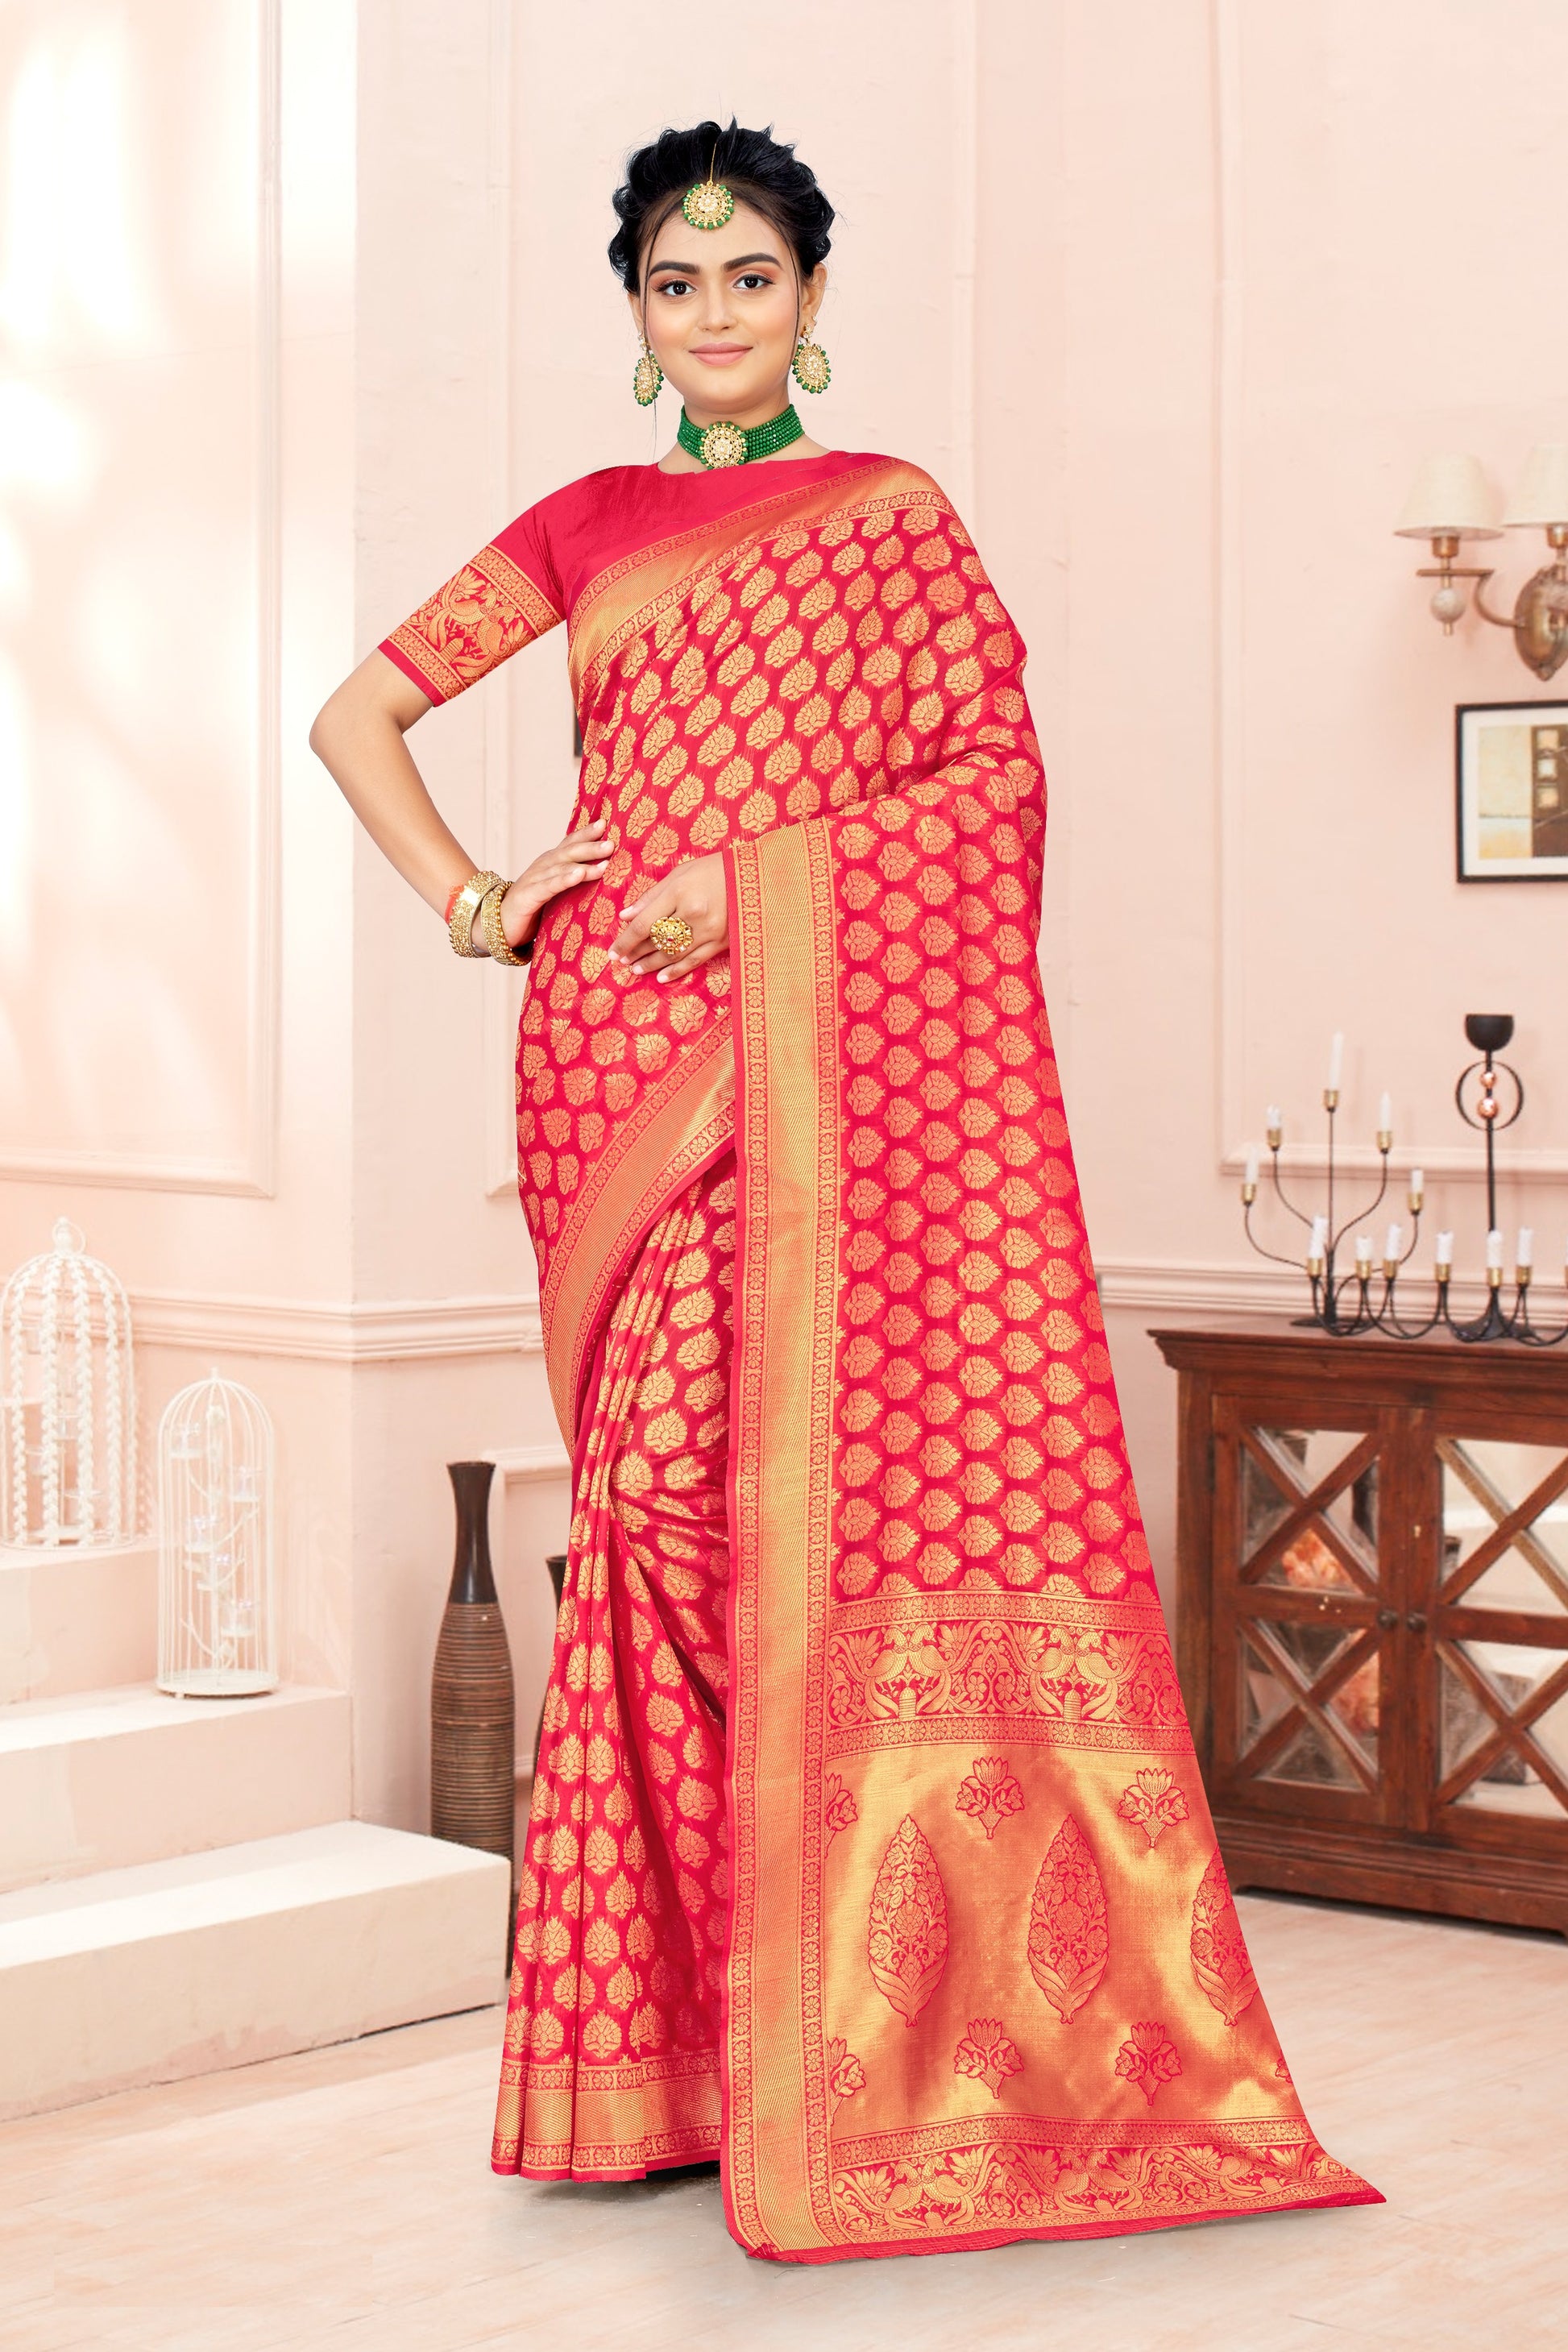 FASHION BOOMS PINK BANARSI SILK TRADITIONAL SAREE FOR WHOLE FAMILY TO WEAR ON ANY OCCASION .